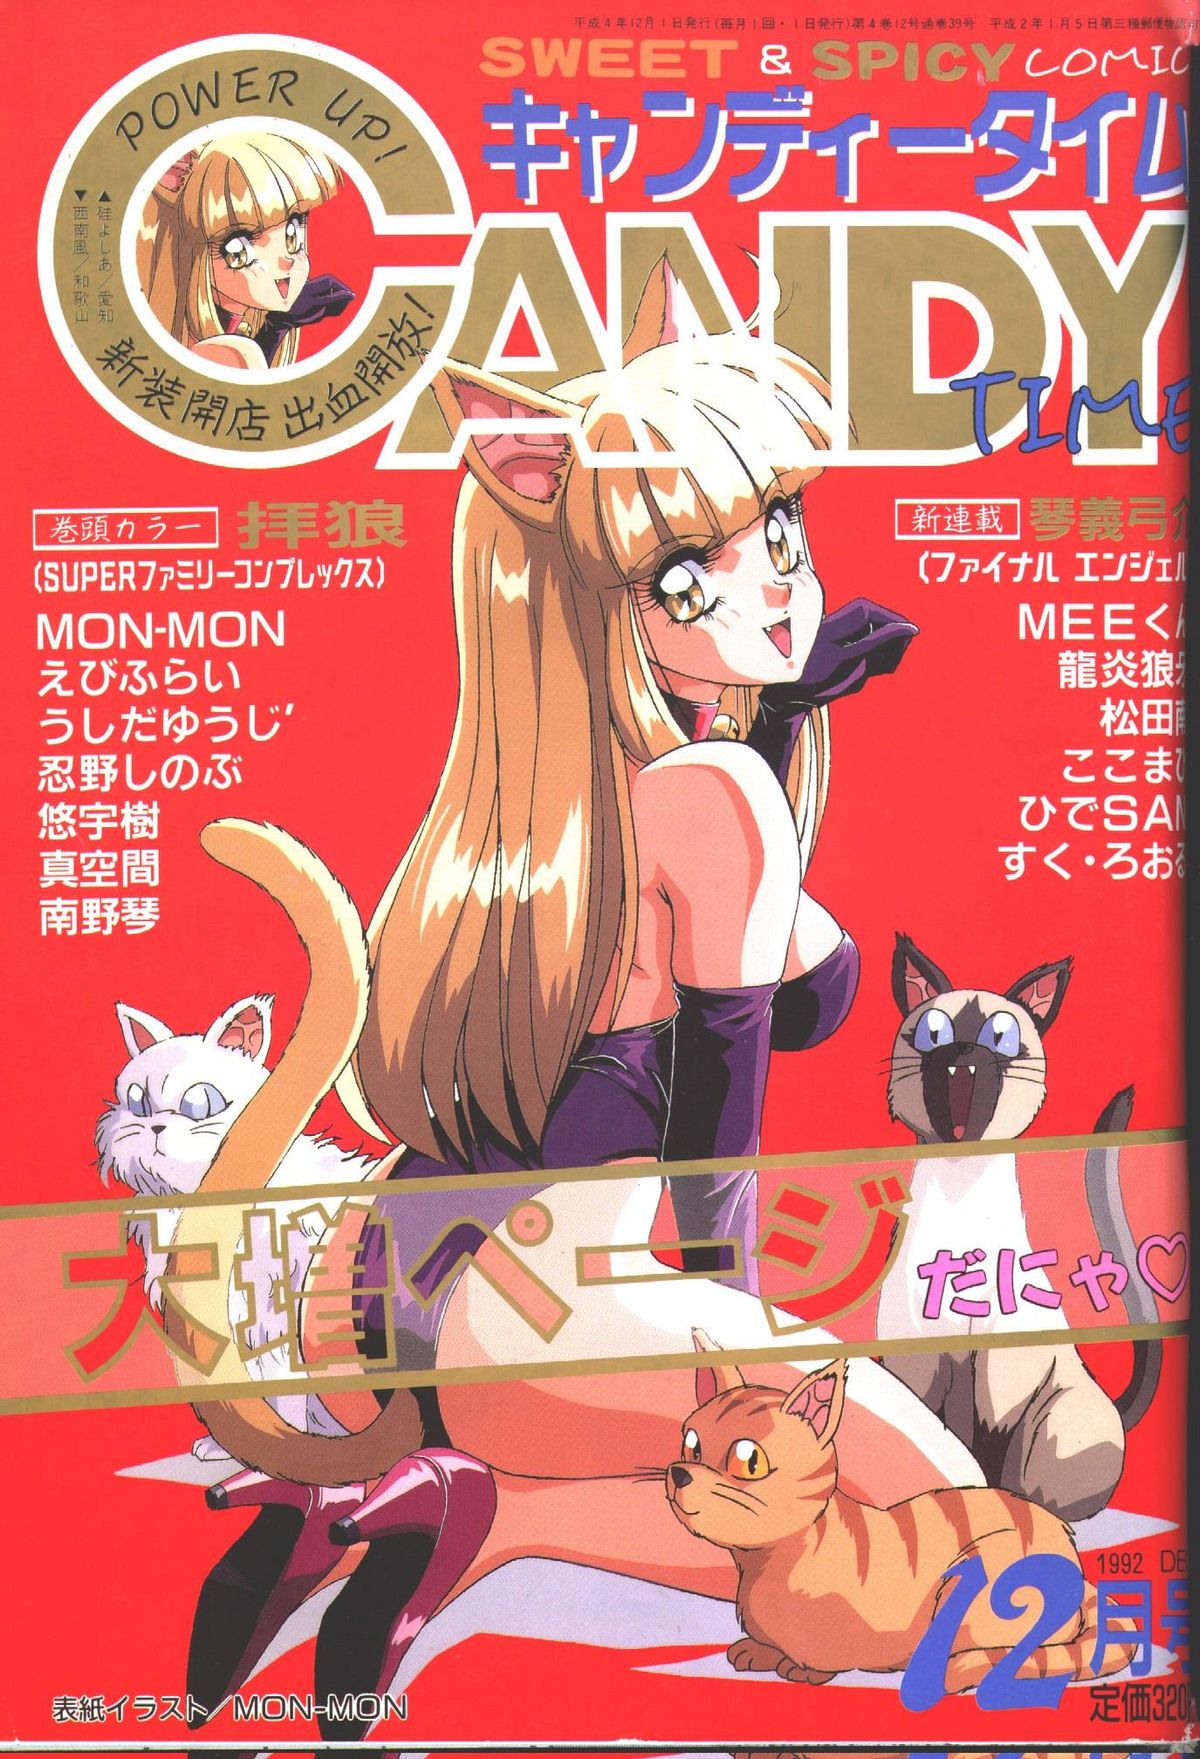 Candy Time 1992-12 [Incomplete] キャンディータイム 1992年12月号 [不完全]